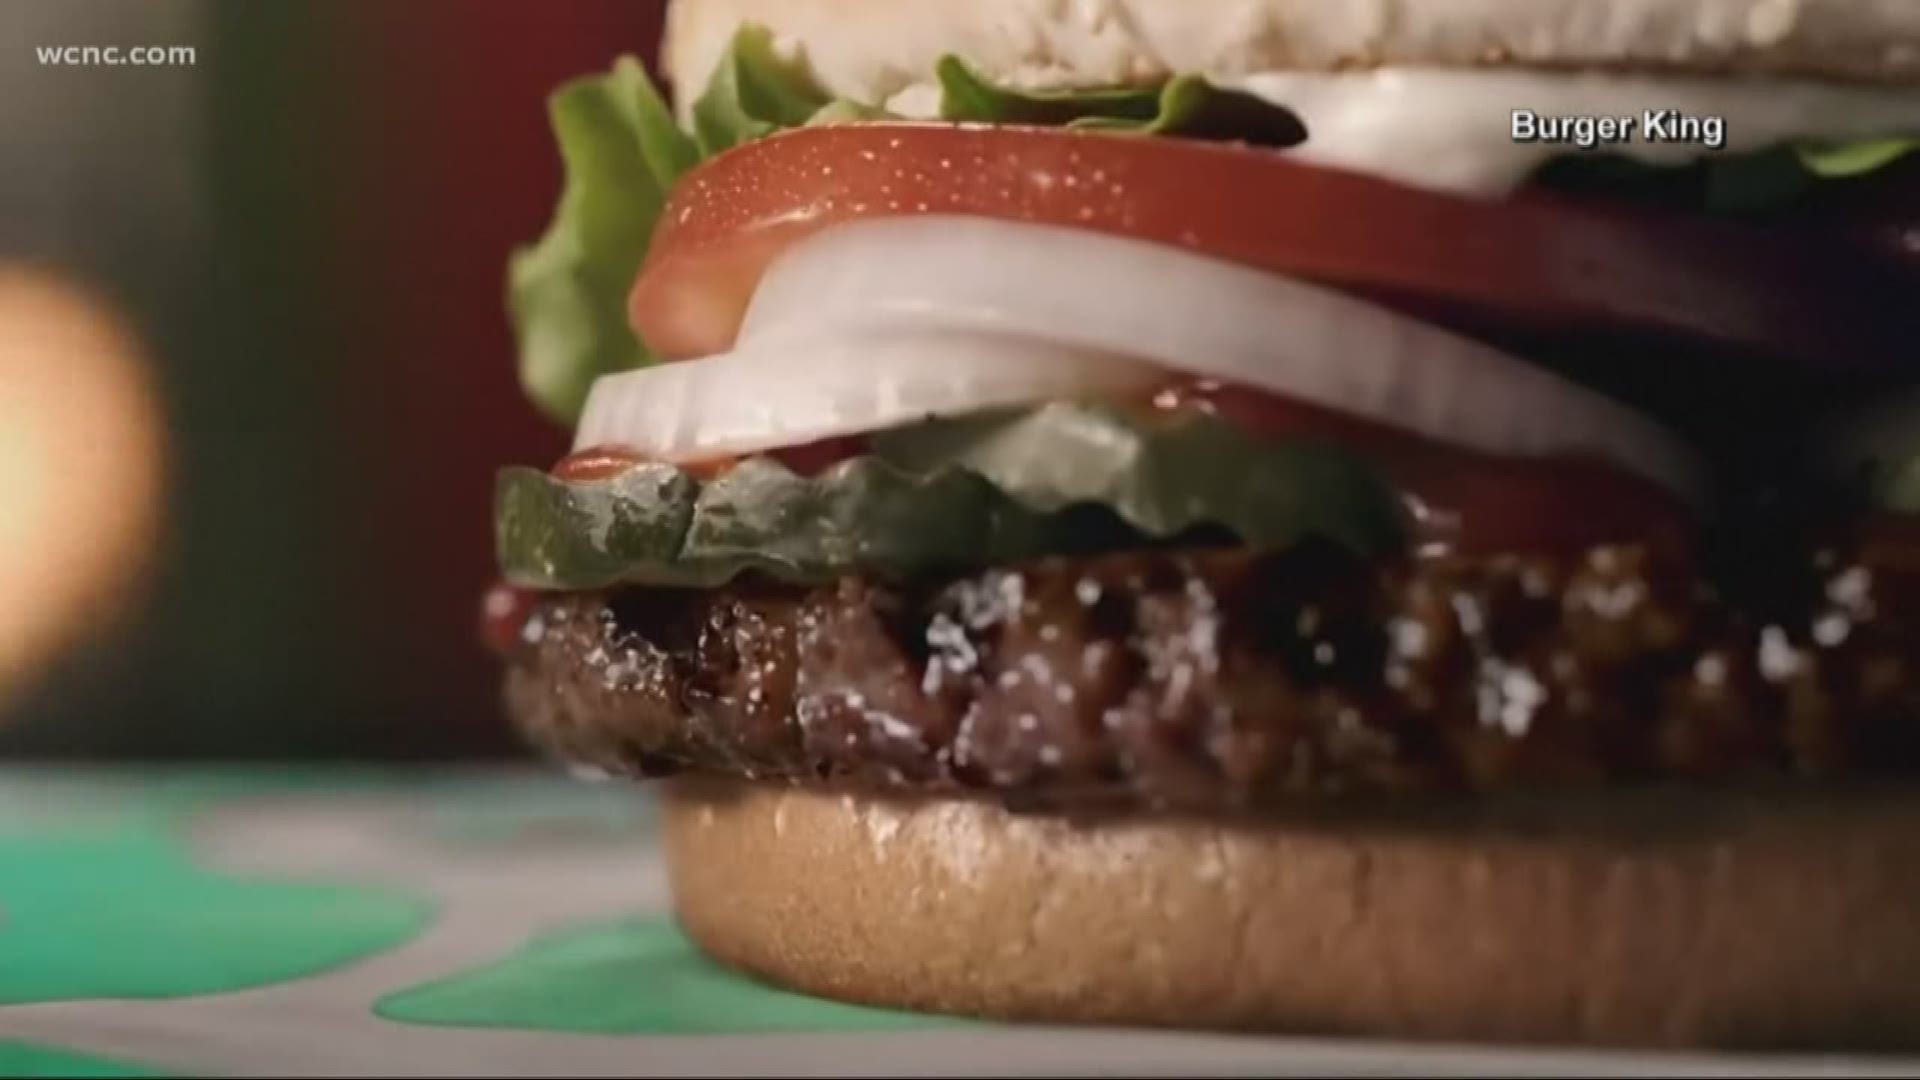 Burger King is hoping to grow its customer base with the release of an all-new vegan burger. It's called the Impossible Whopper and will be on menus all across America by the end of 2019.